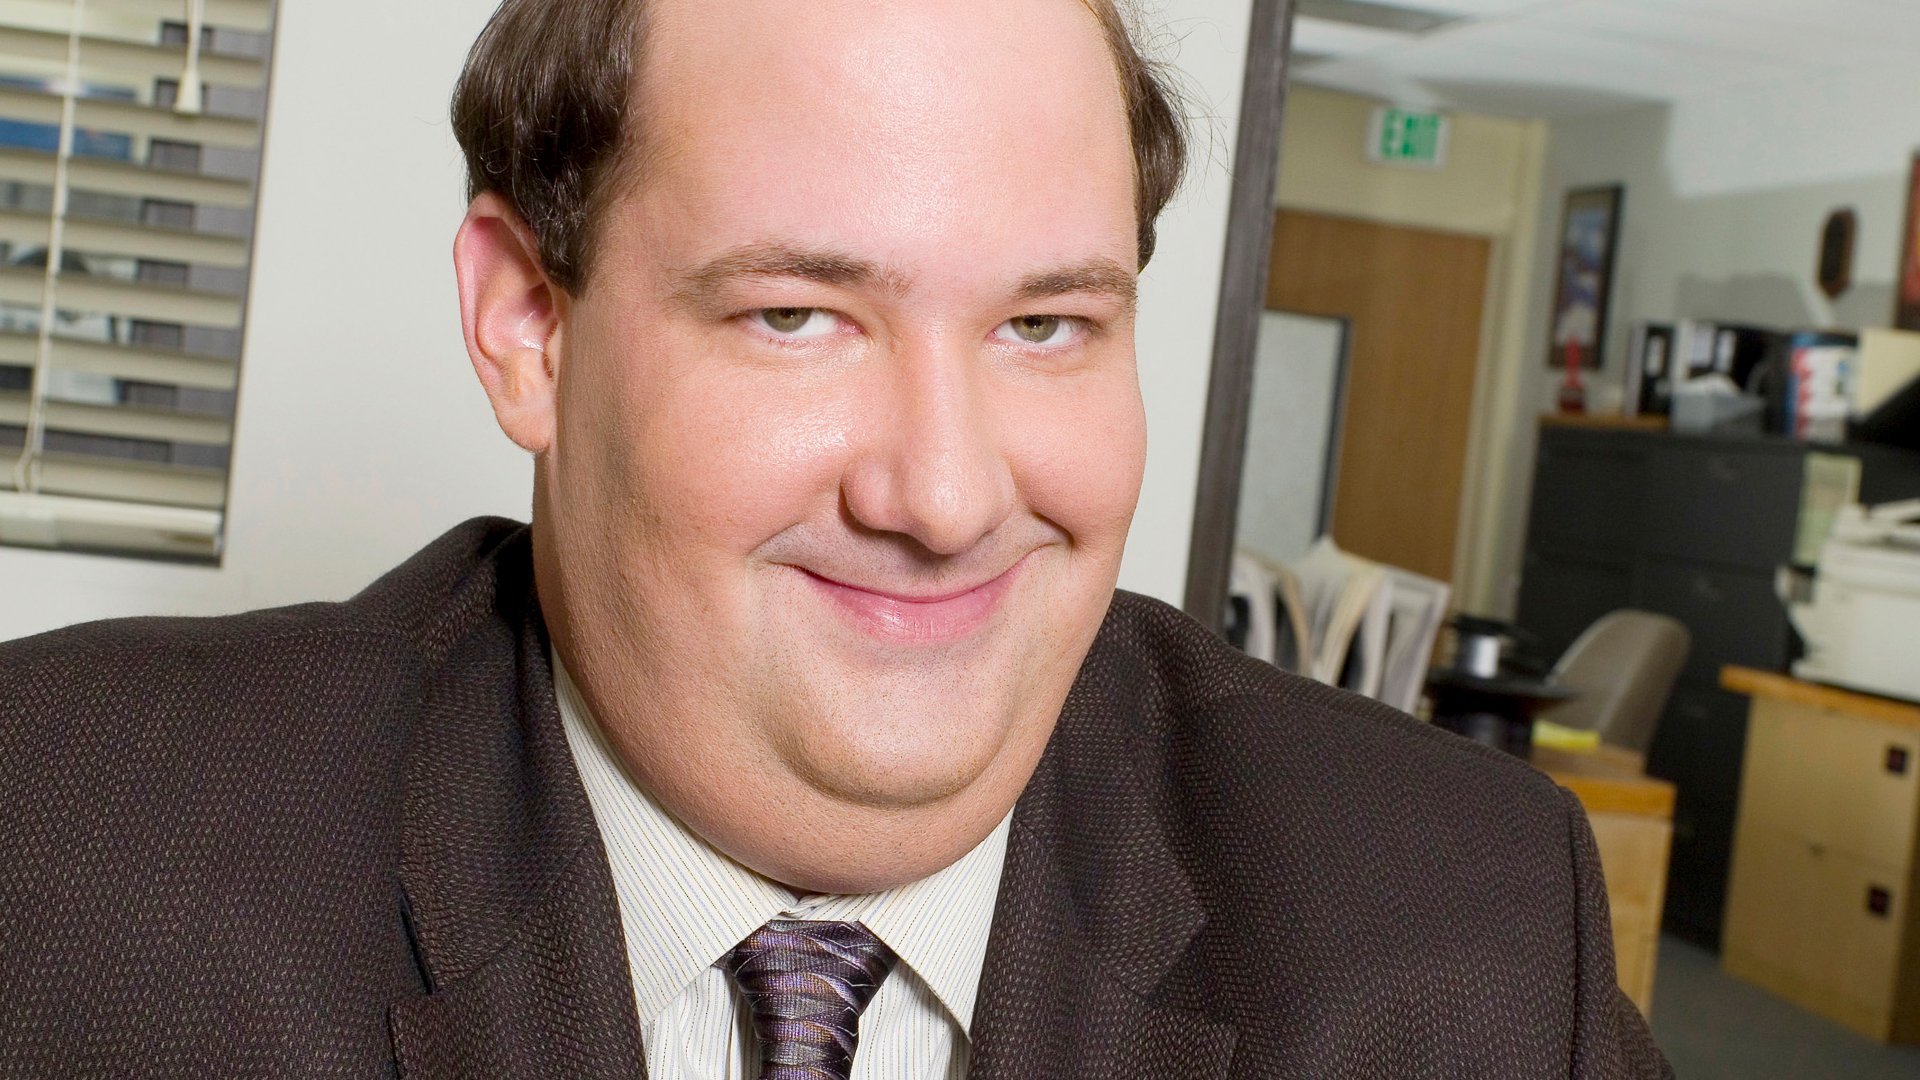 Brian Baumgartner as Kevin Malone on 'The Office'